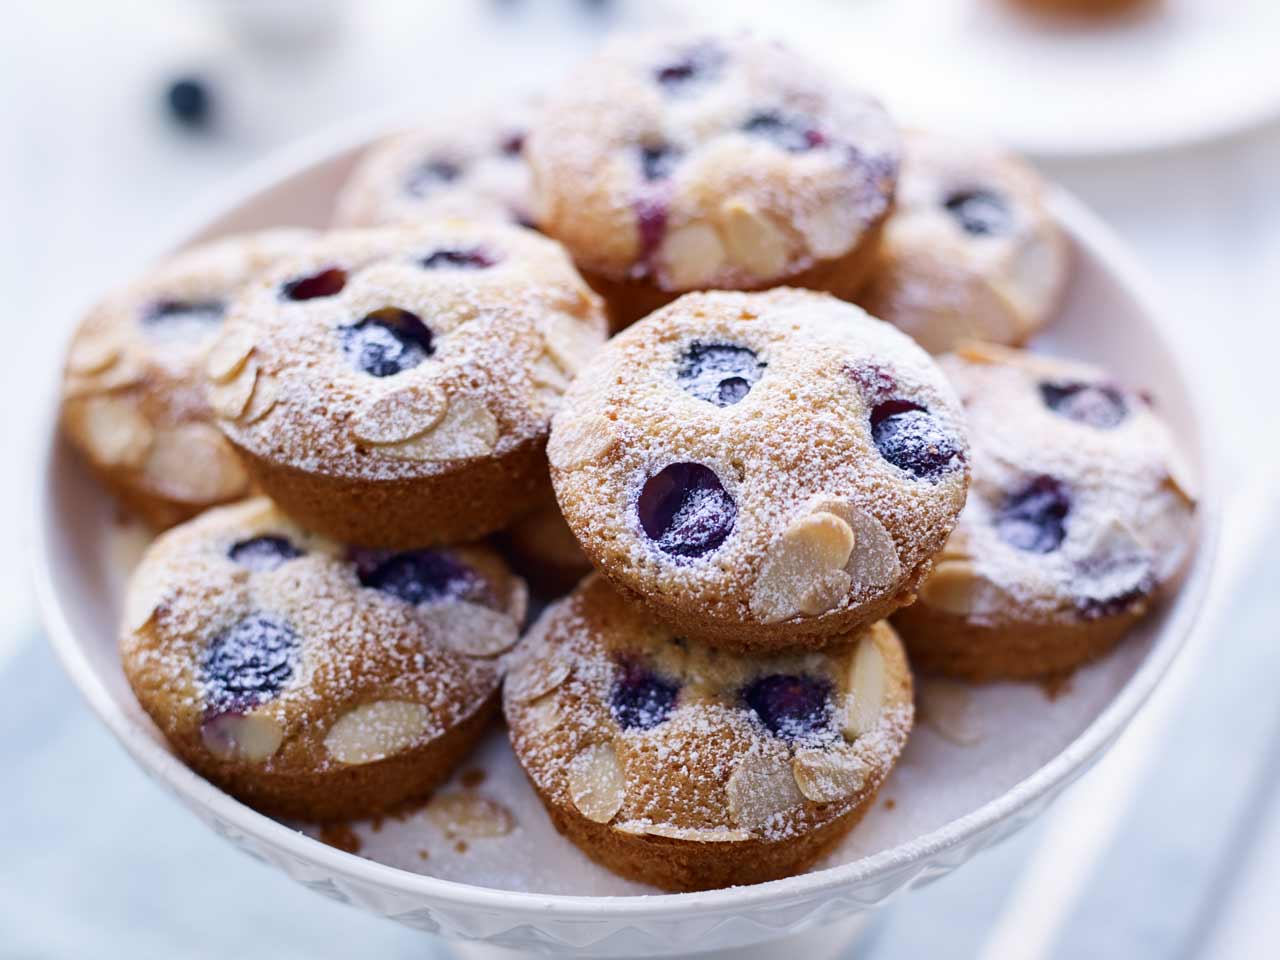 Blueberry and almond friands